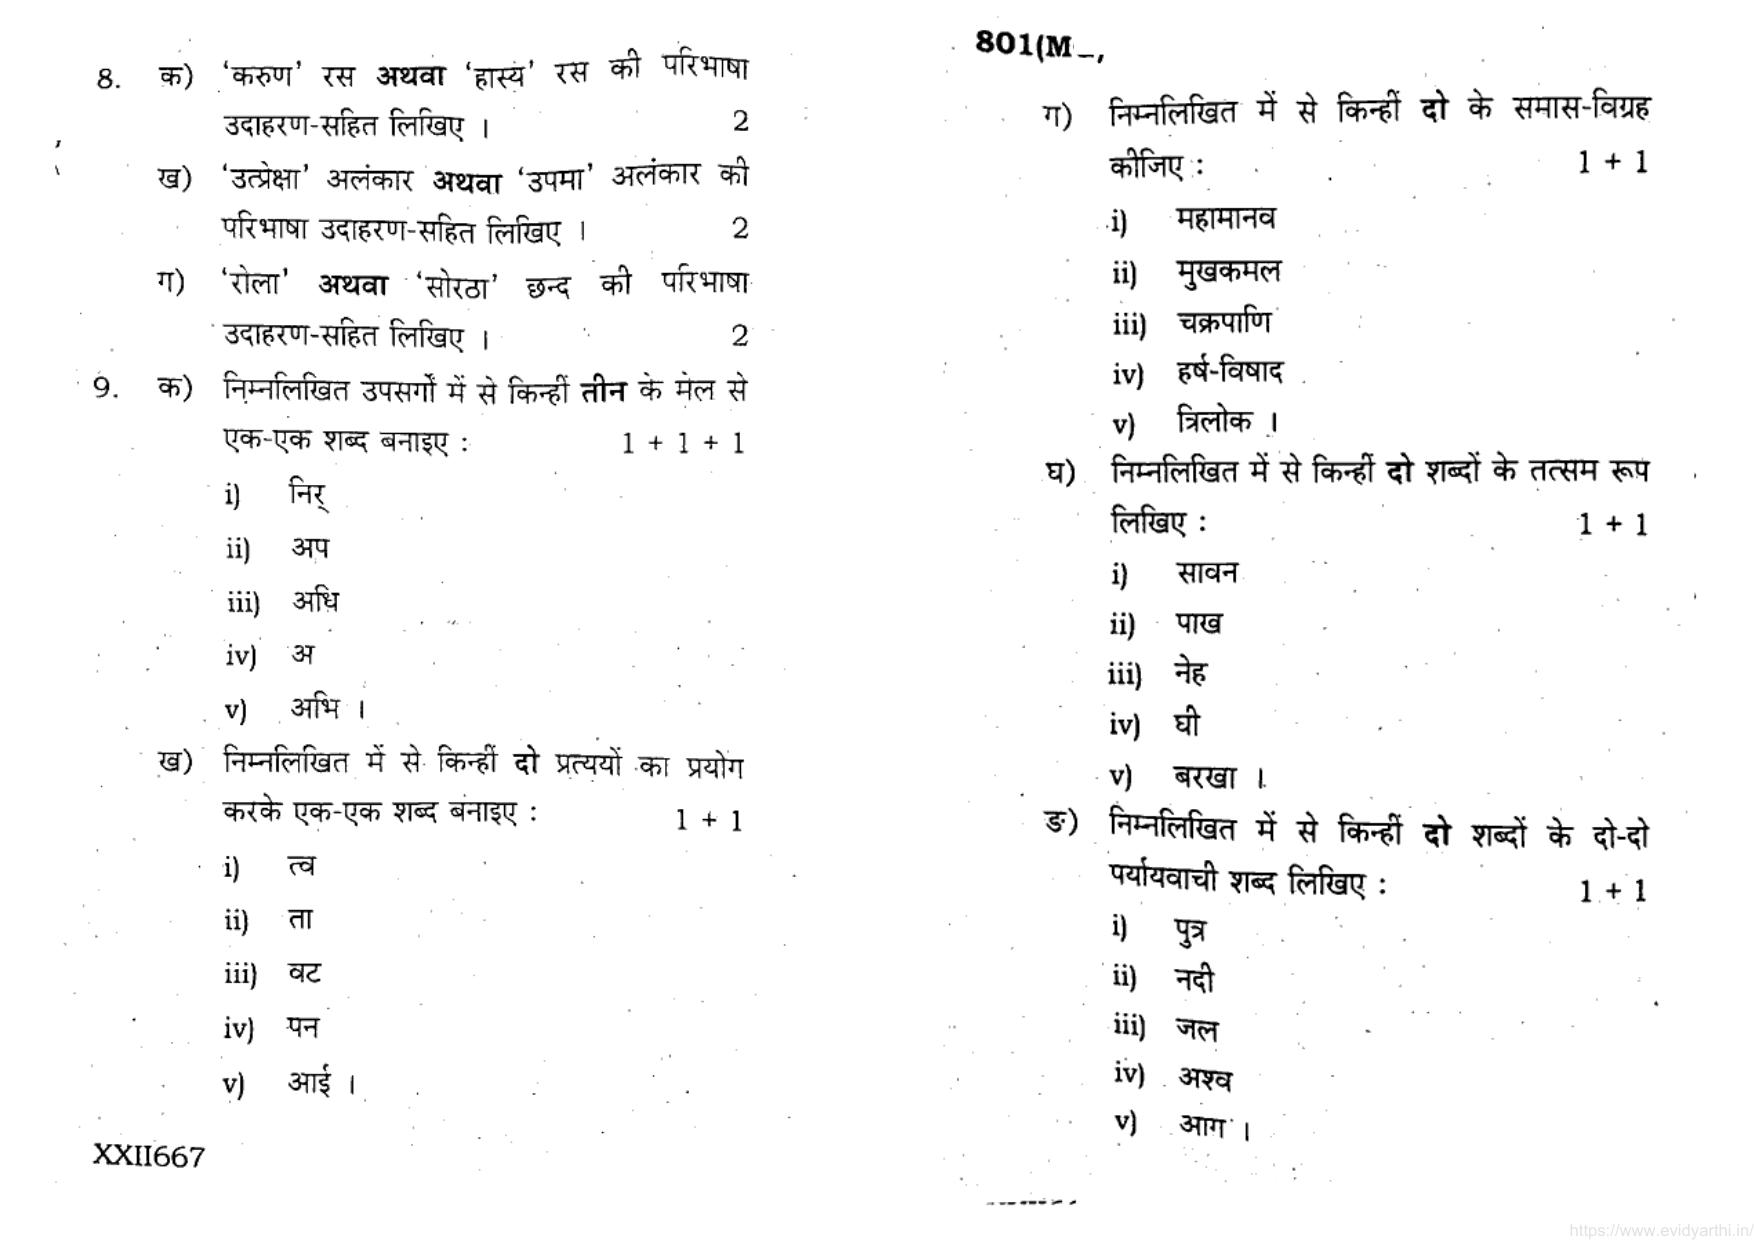 UP Board Previous Year Question Paper Class 10 Hindi (801 MG) – 2020 - Page 4